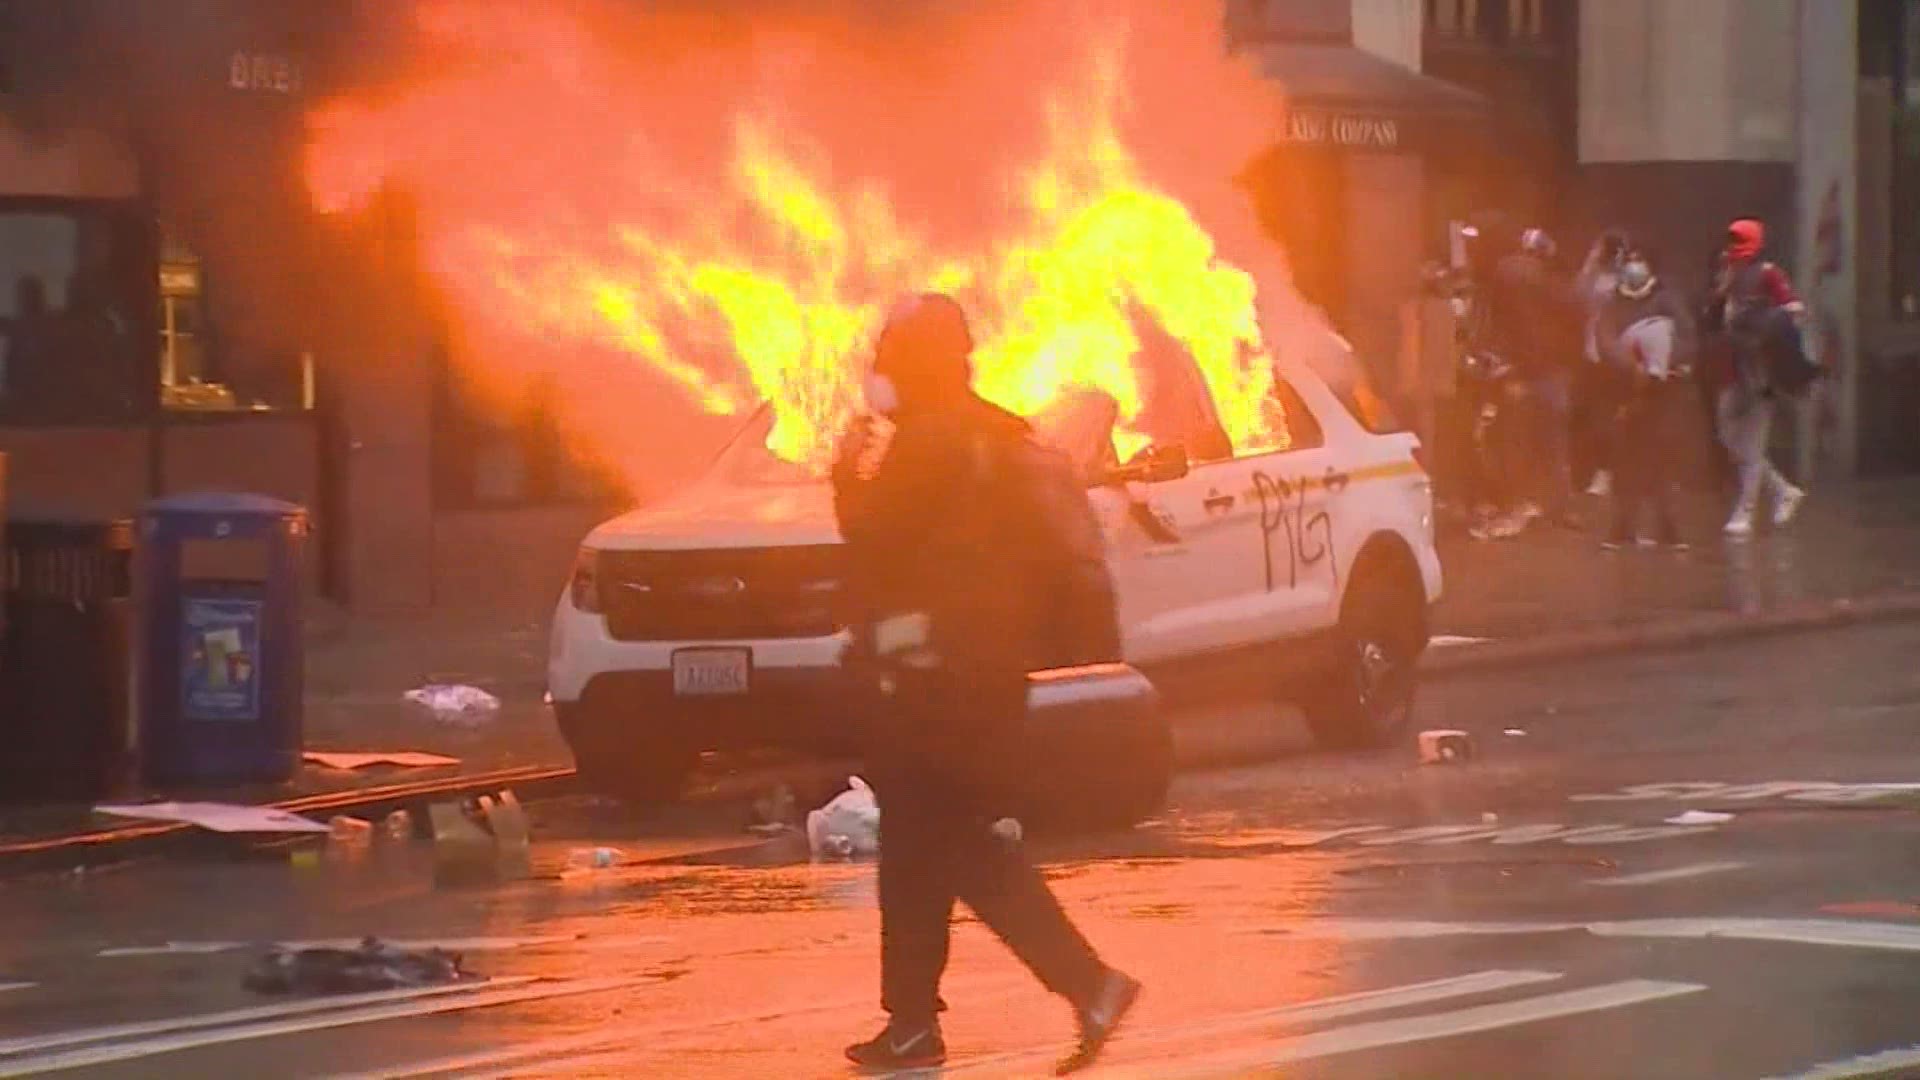 Kelly Thomas Jackson set two Seattle police cars on fire during a May 2020 protest that turned violent.